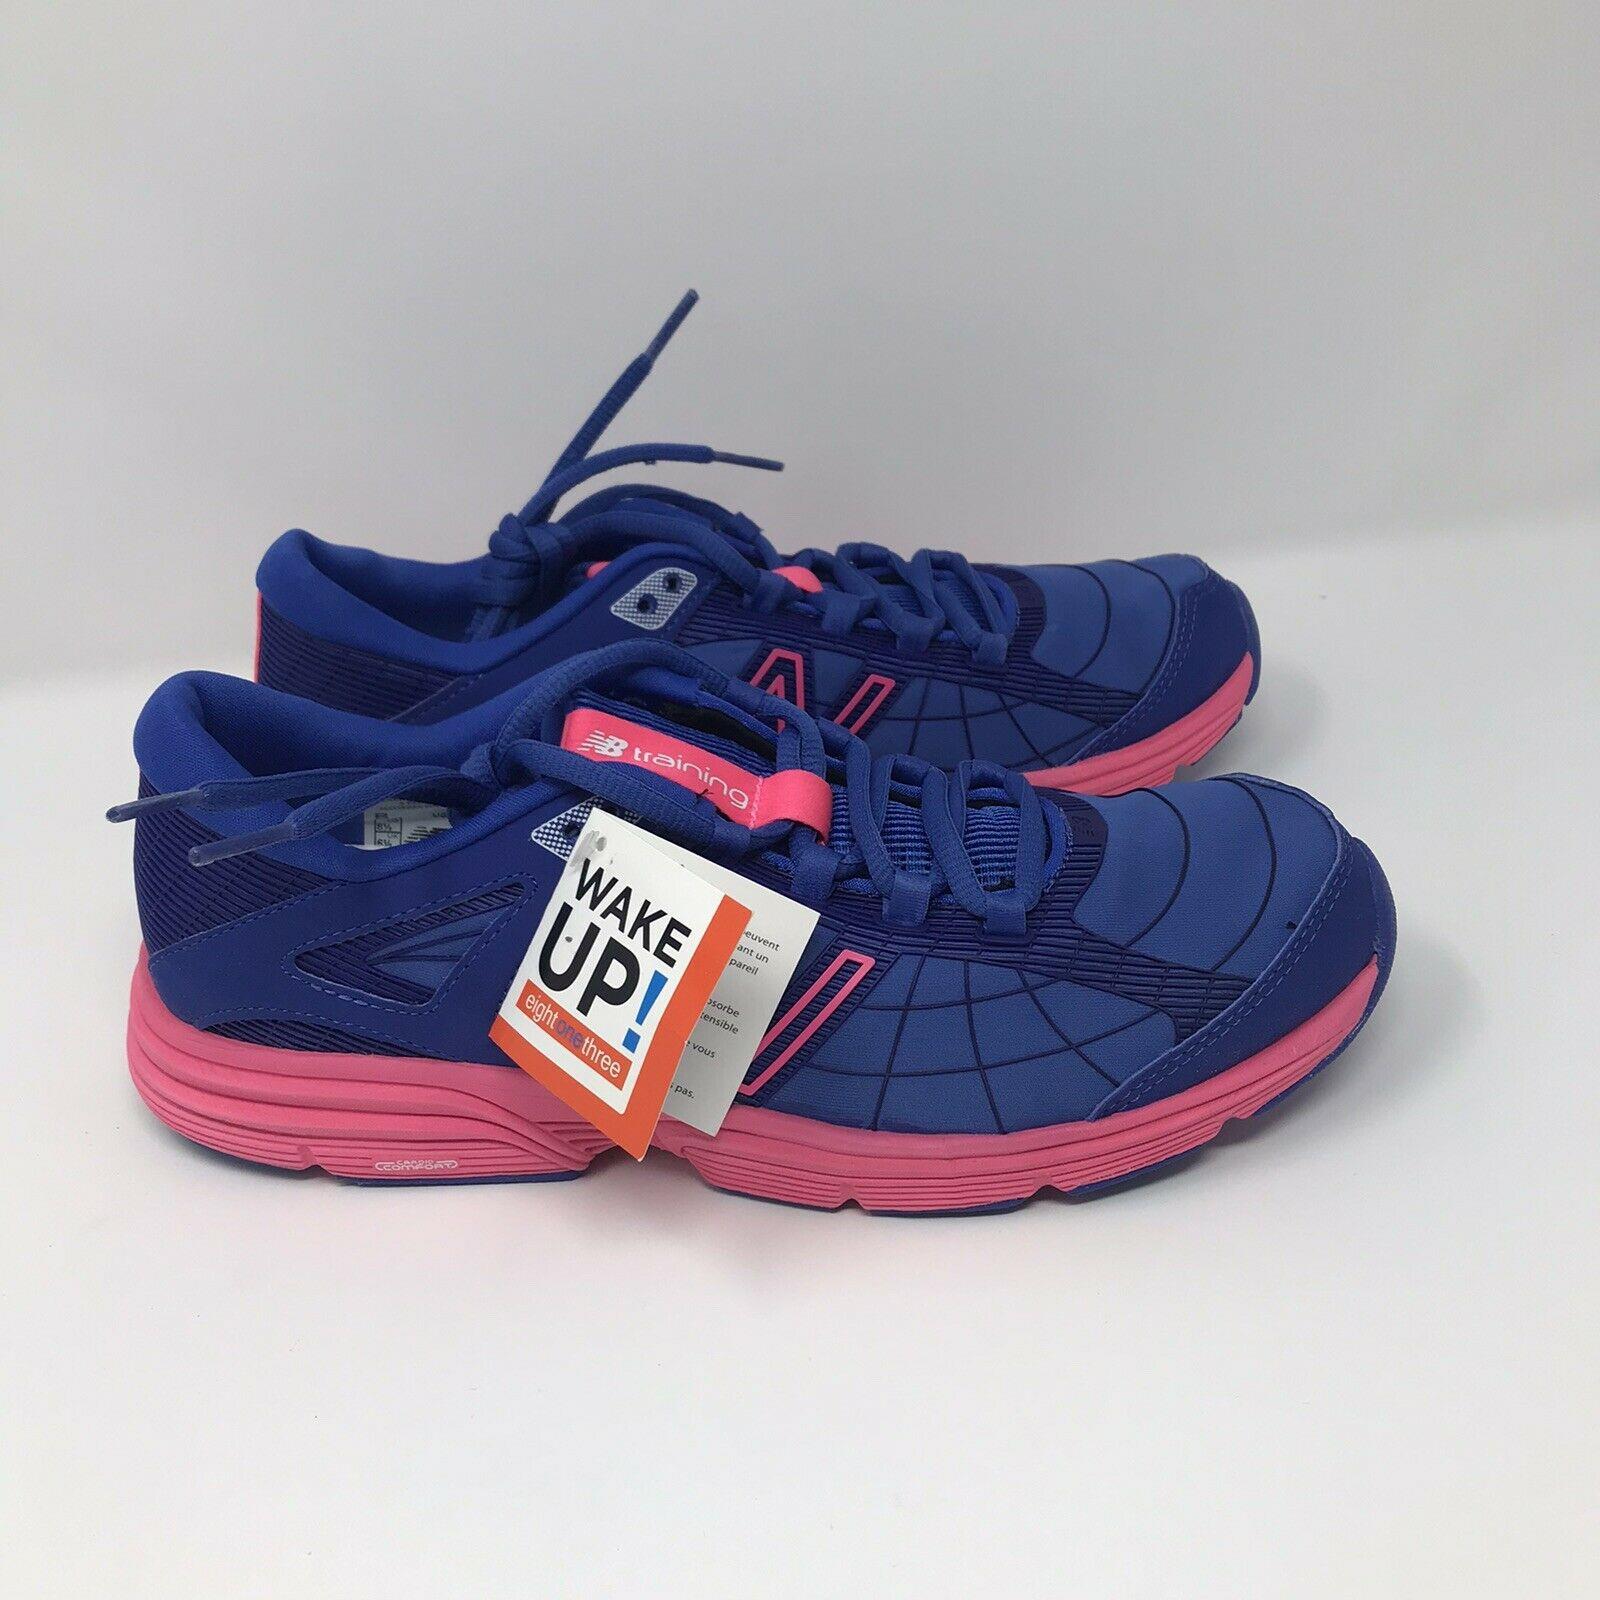 Balance WX813 Blue Pink Cross Training Sneakers Shoes Trainers Size 8.5